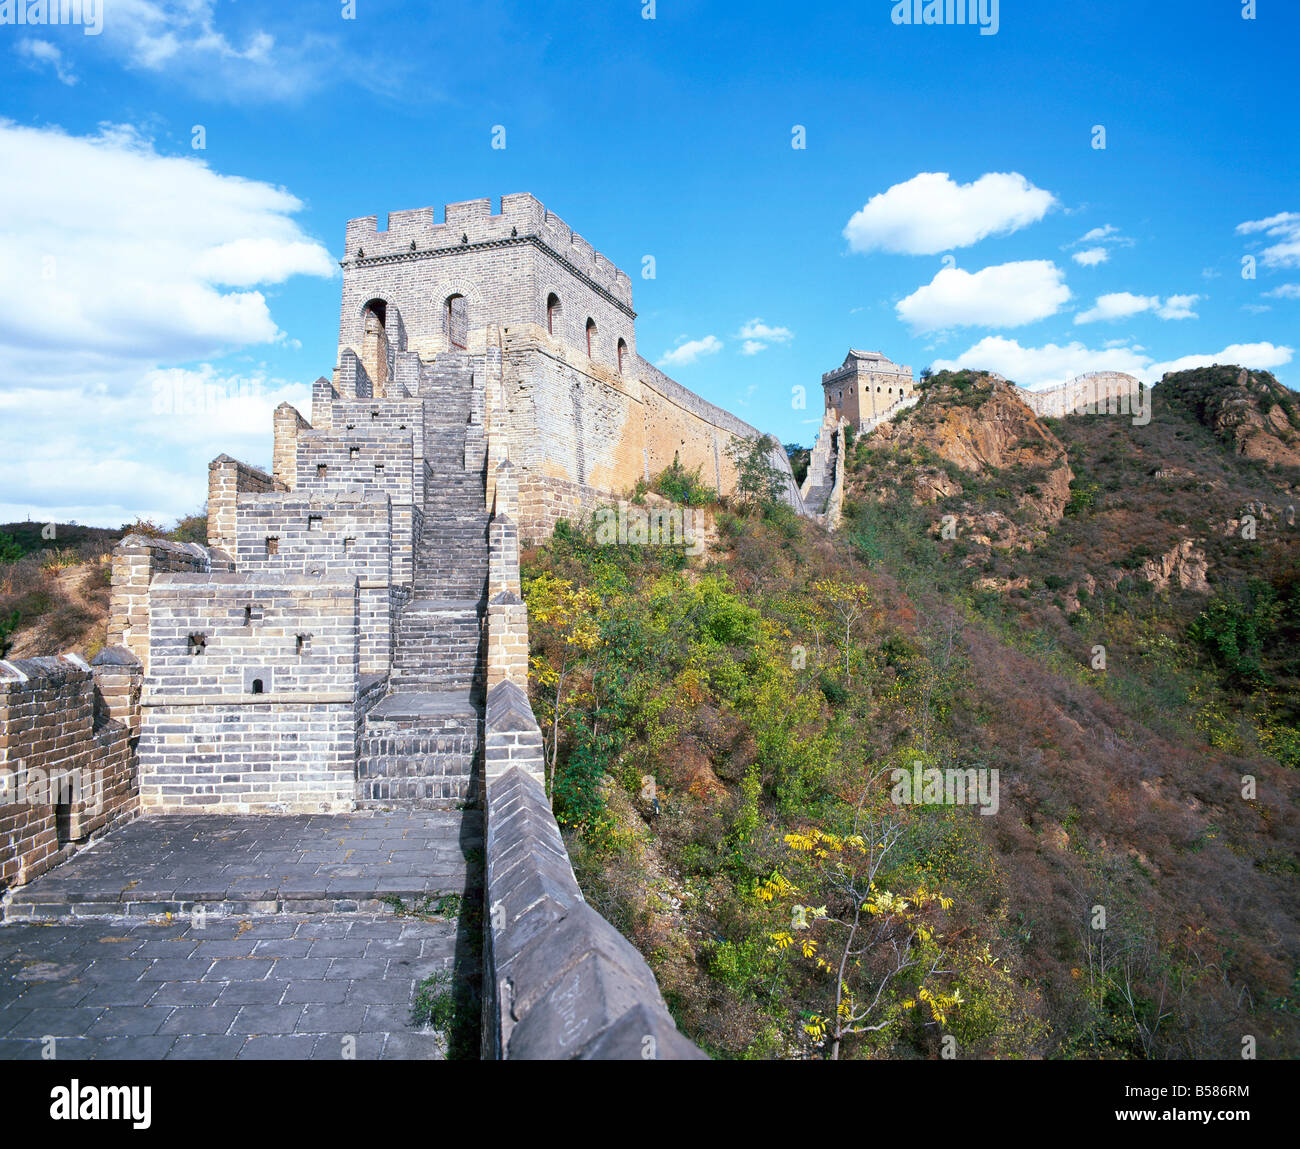 Elevated panoramic view of the Jinshanling section, Great Wall of China, UNESCO World Heritage Site, near Beijing, China, Asia Stock Photo